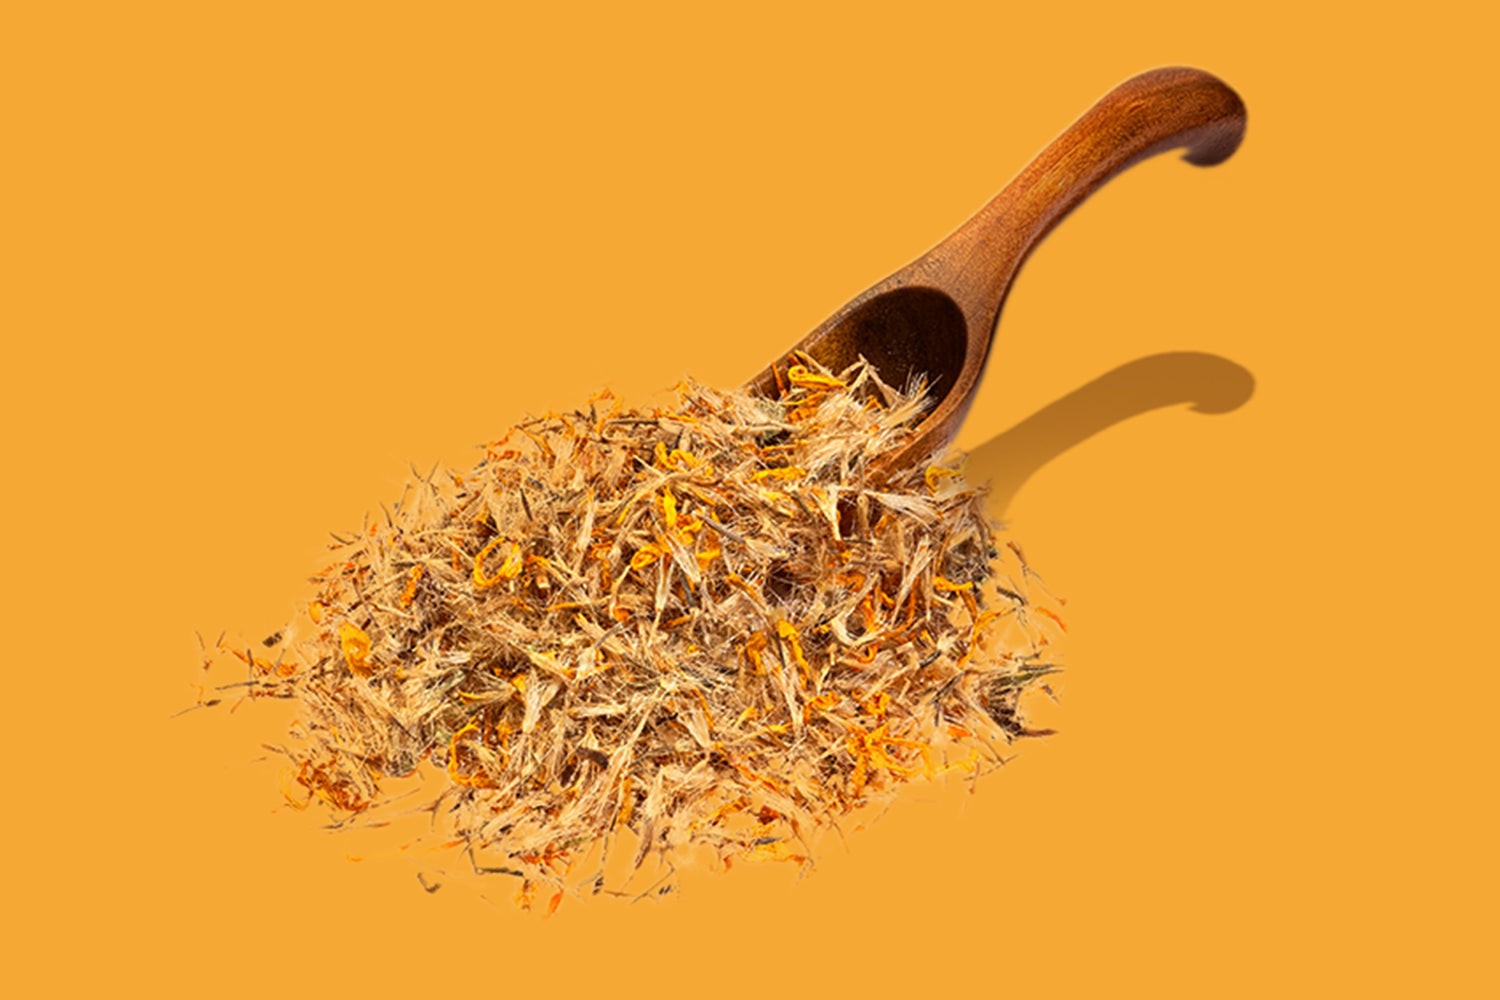 A scoop of arnica. Learn more about what arnica is used for on your skin at PillowtalkDerm.